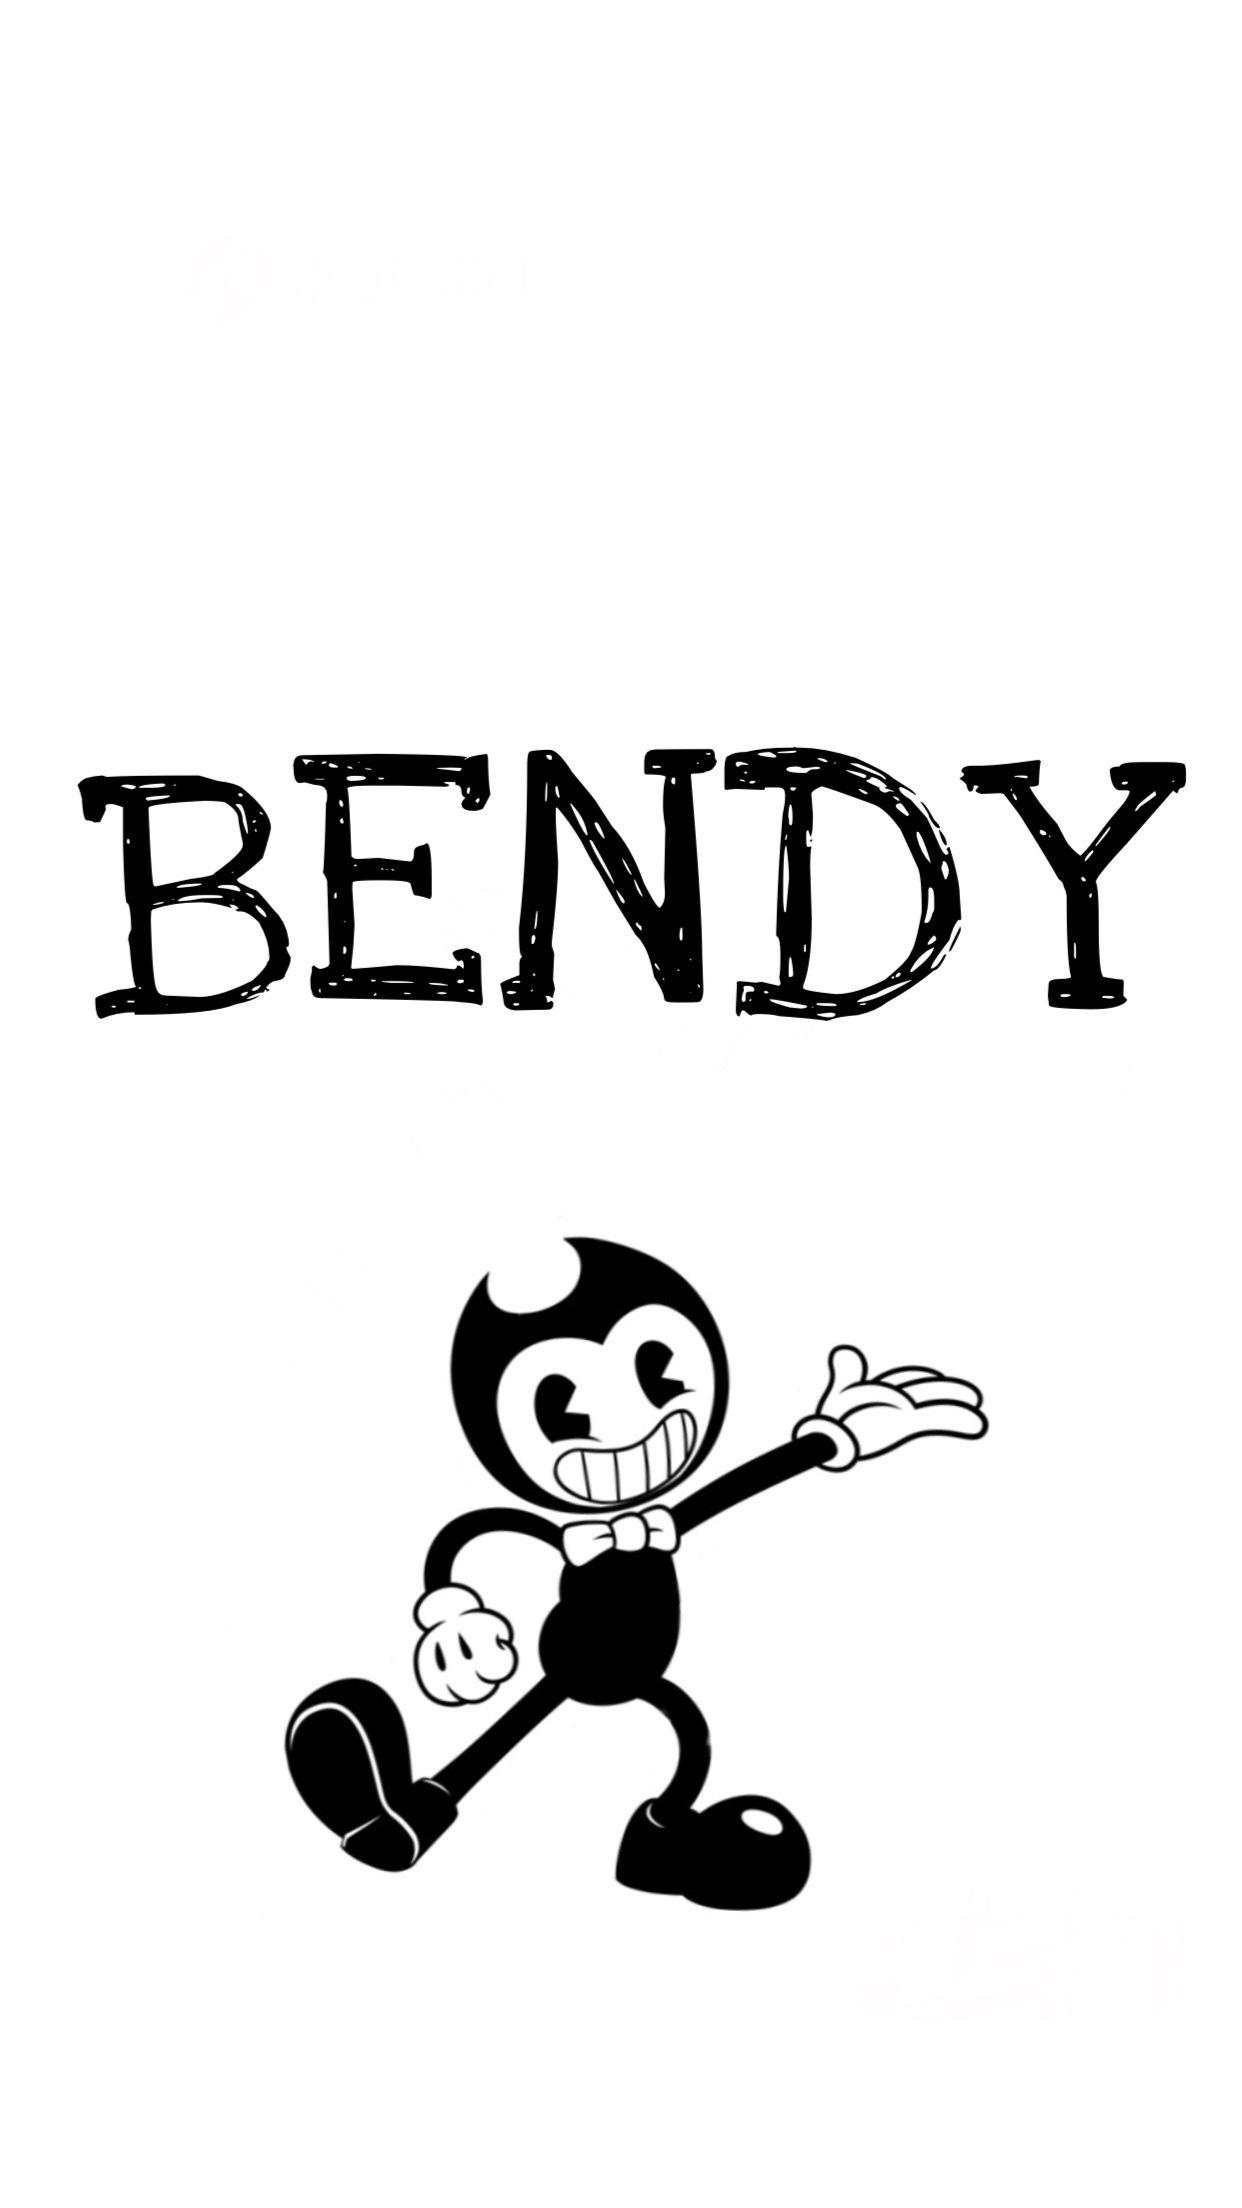 Bendy and the ink machine wallpaper